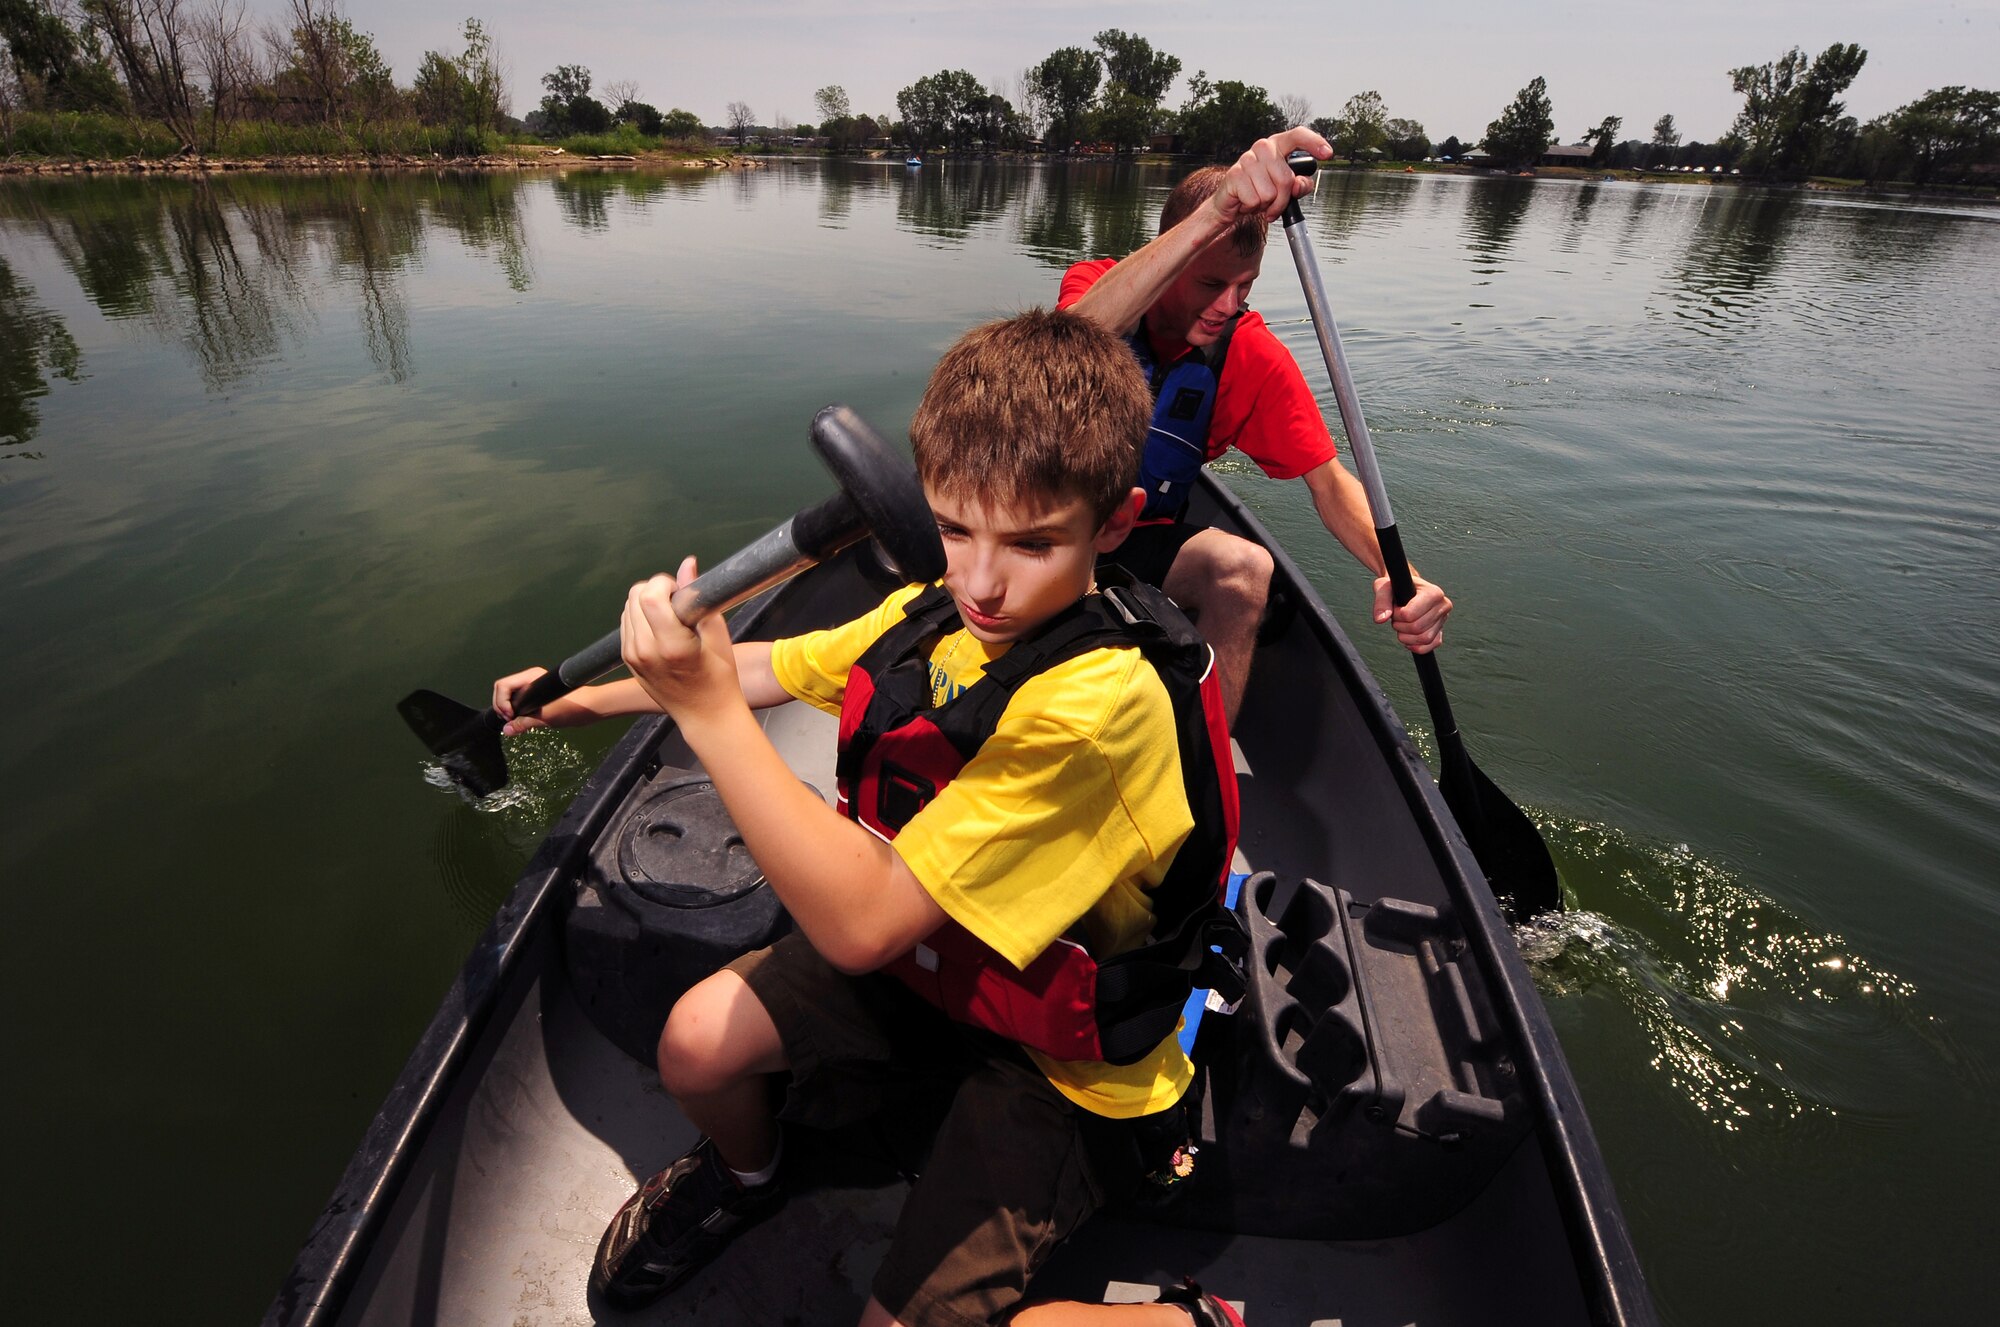 Nine year-old Chris Stewart and Offutt volunteer U.S. Air Force Tech. Sgt. Chris Wroegler navigate their canoe around the Offutt Base Lake during the Exceptional Family Members Program’s Camp Offutt July 12 at Offutt AFB, Neb.  This is the second year of the day camp which was founded by Offutt’s Exceptional Family Member Program was put on to enhance skills and build friendships.  (U.S. Air Force photo by Josh Plueger/Released)